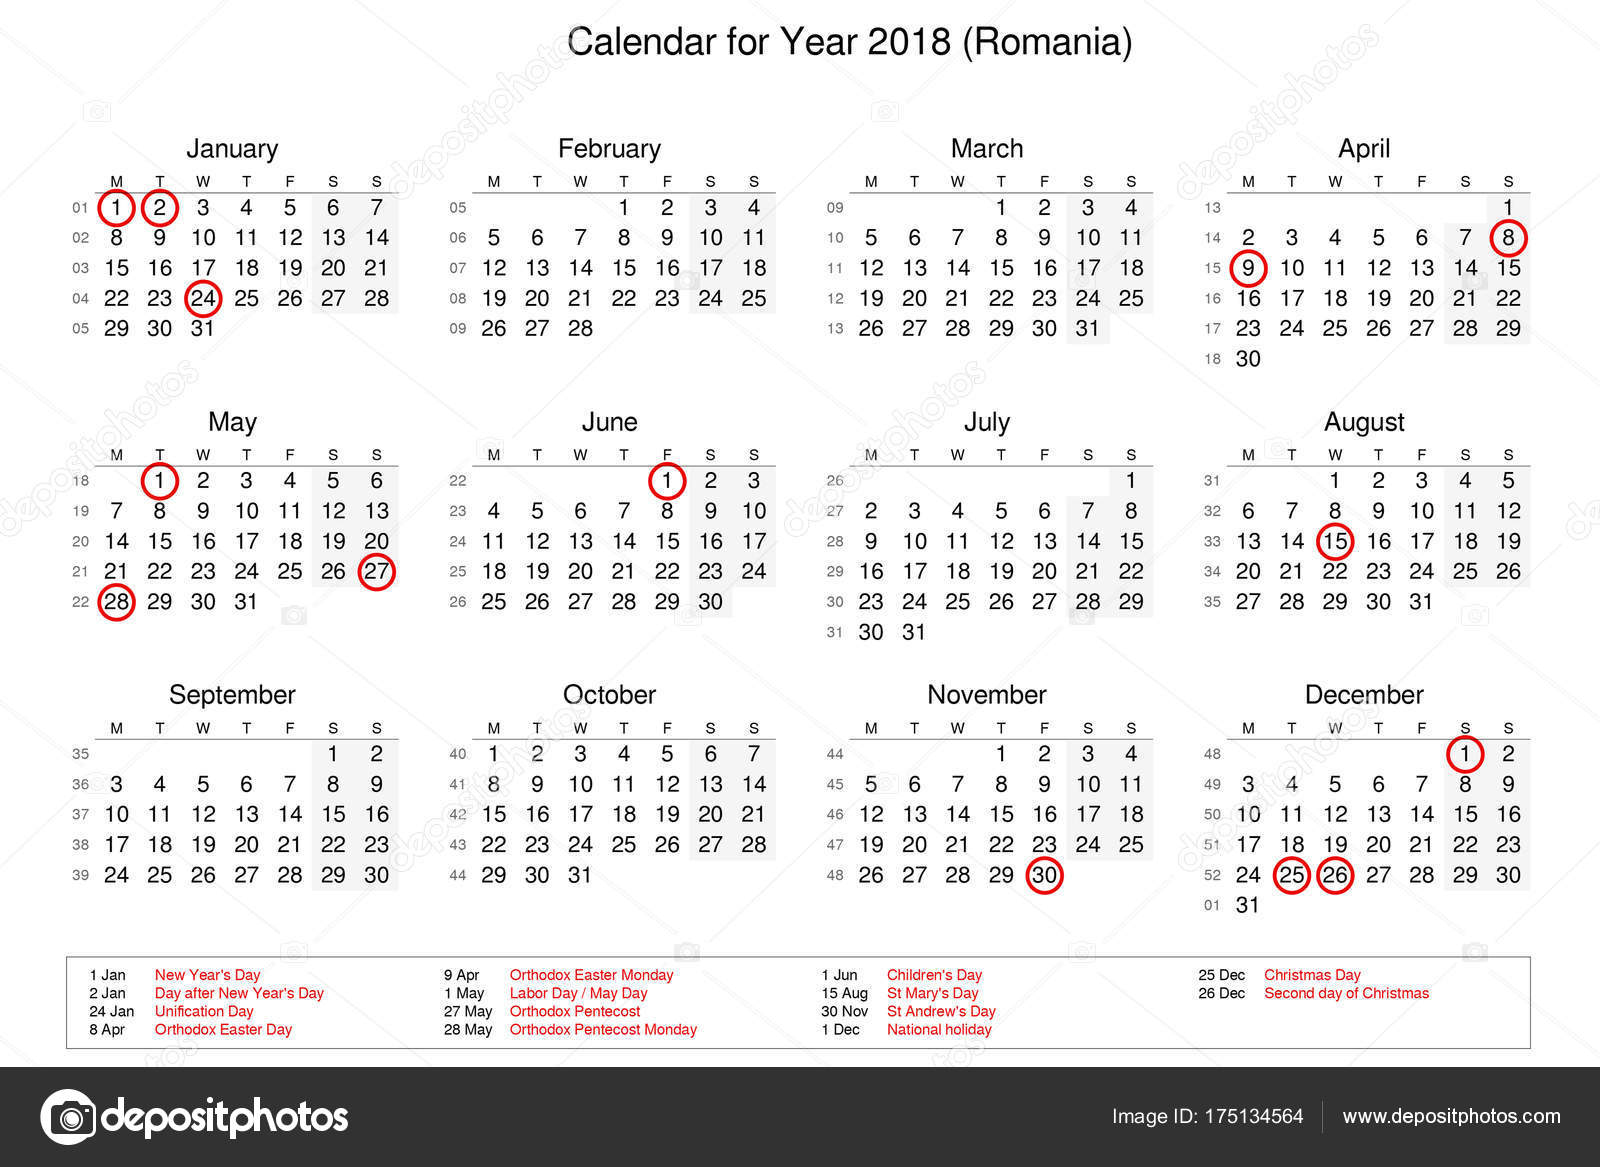 calendar-of-year-2018-with-public-holidays-and-bank-holidays-for